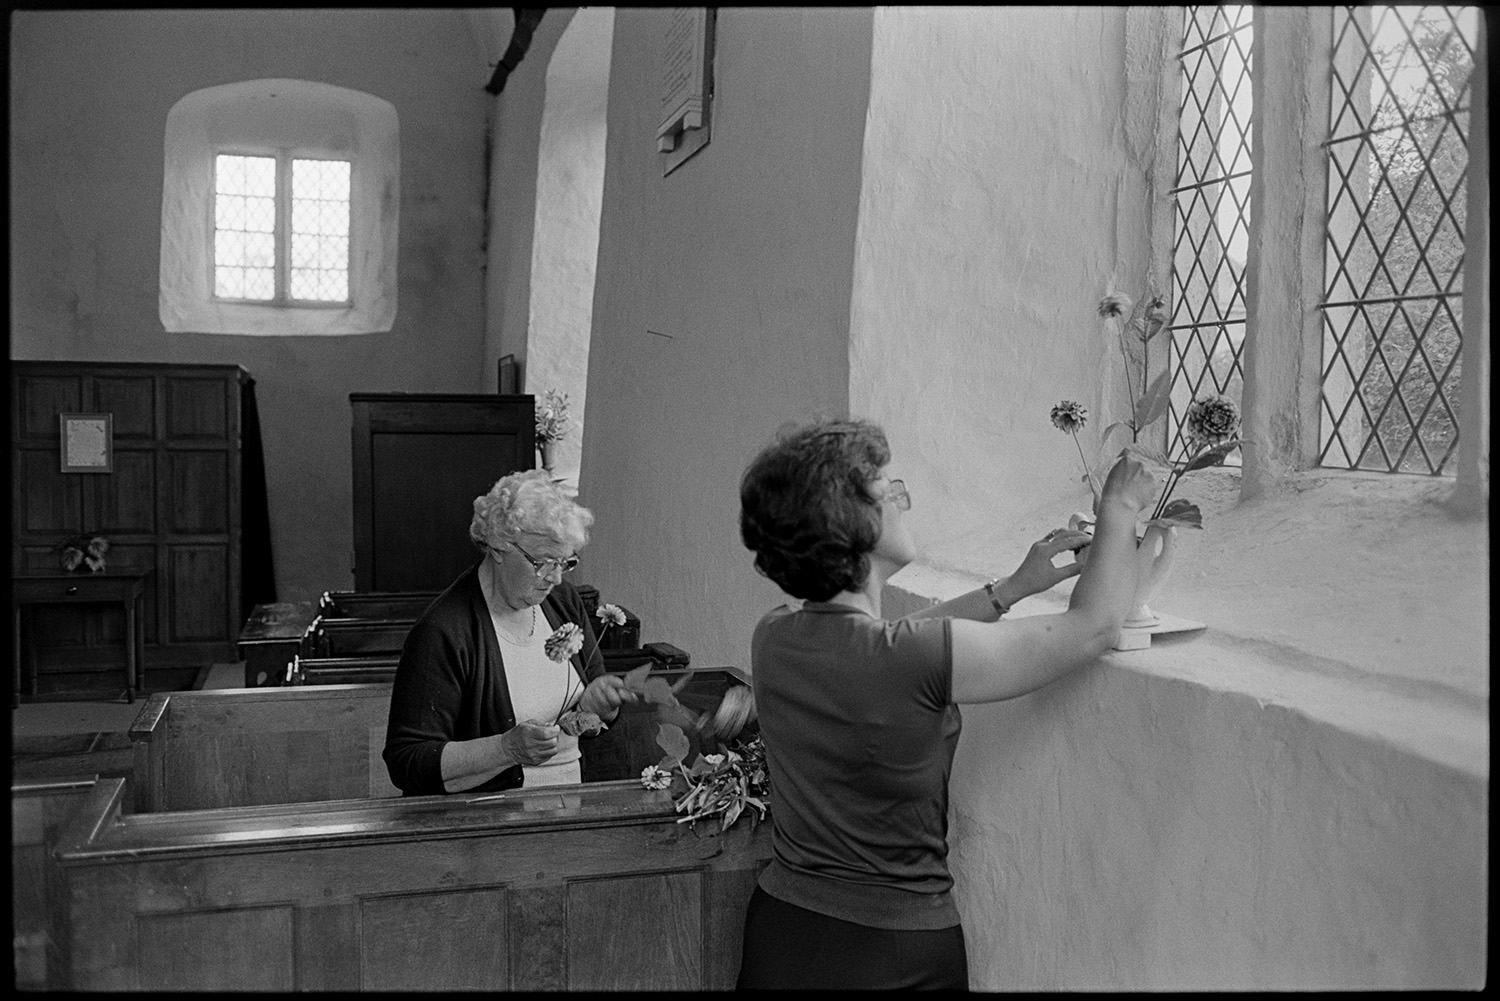 Women decorating church for Harvest Festival. Flowers.
[Two women arranging flowers in a vase on a windowsill in Dowland Church for the Harvest Festival. The women are stood in wooden pews.]